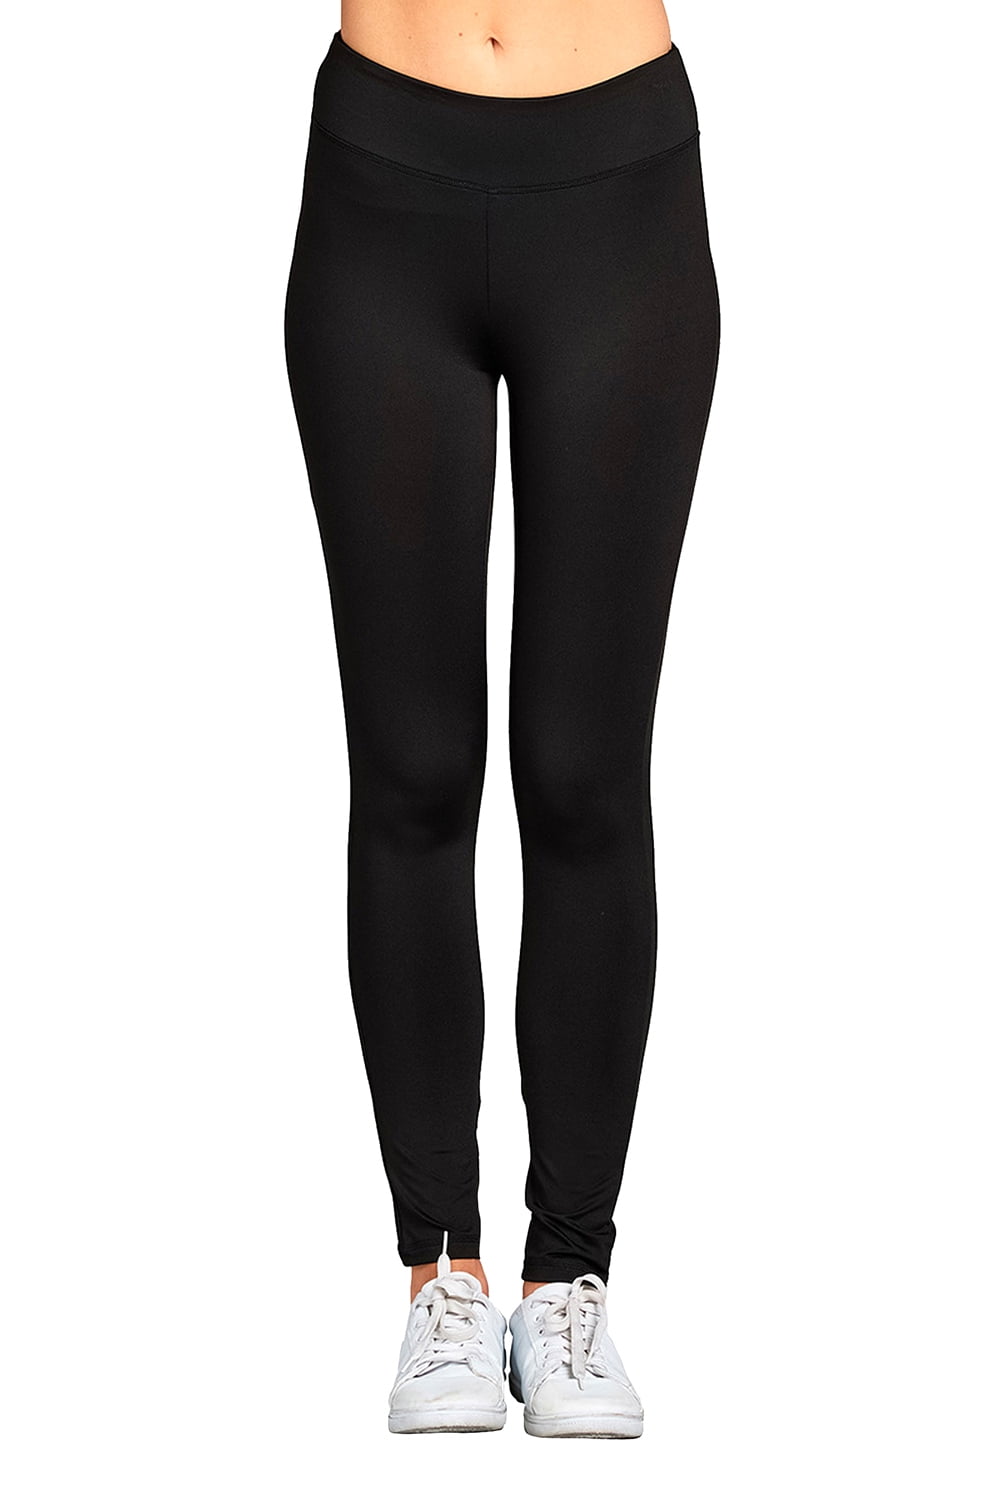 Women's Stretch Spandex Lightweight Skinny Ankle Active Workout Leggings (FREE SHIPPING)